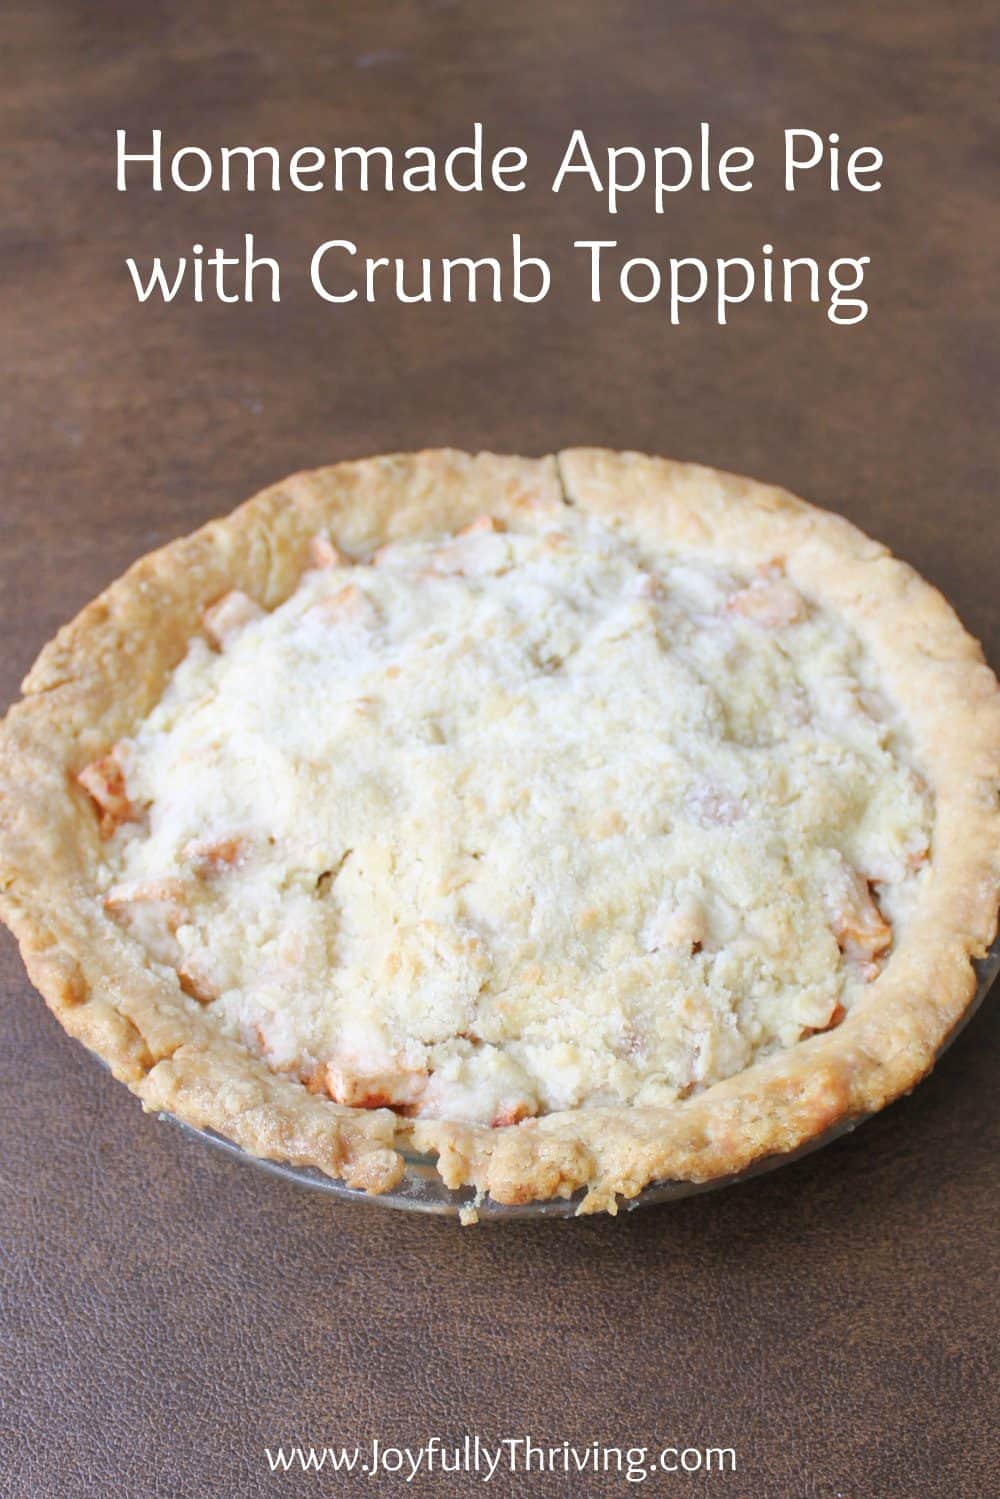 Easy Homemade Apple Pie with Crumb Topping - This is really an easy recipe and the best apple pie I've ever eaten! Plus, you can freeze it which is amazing!